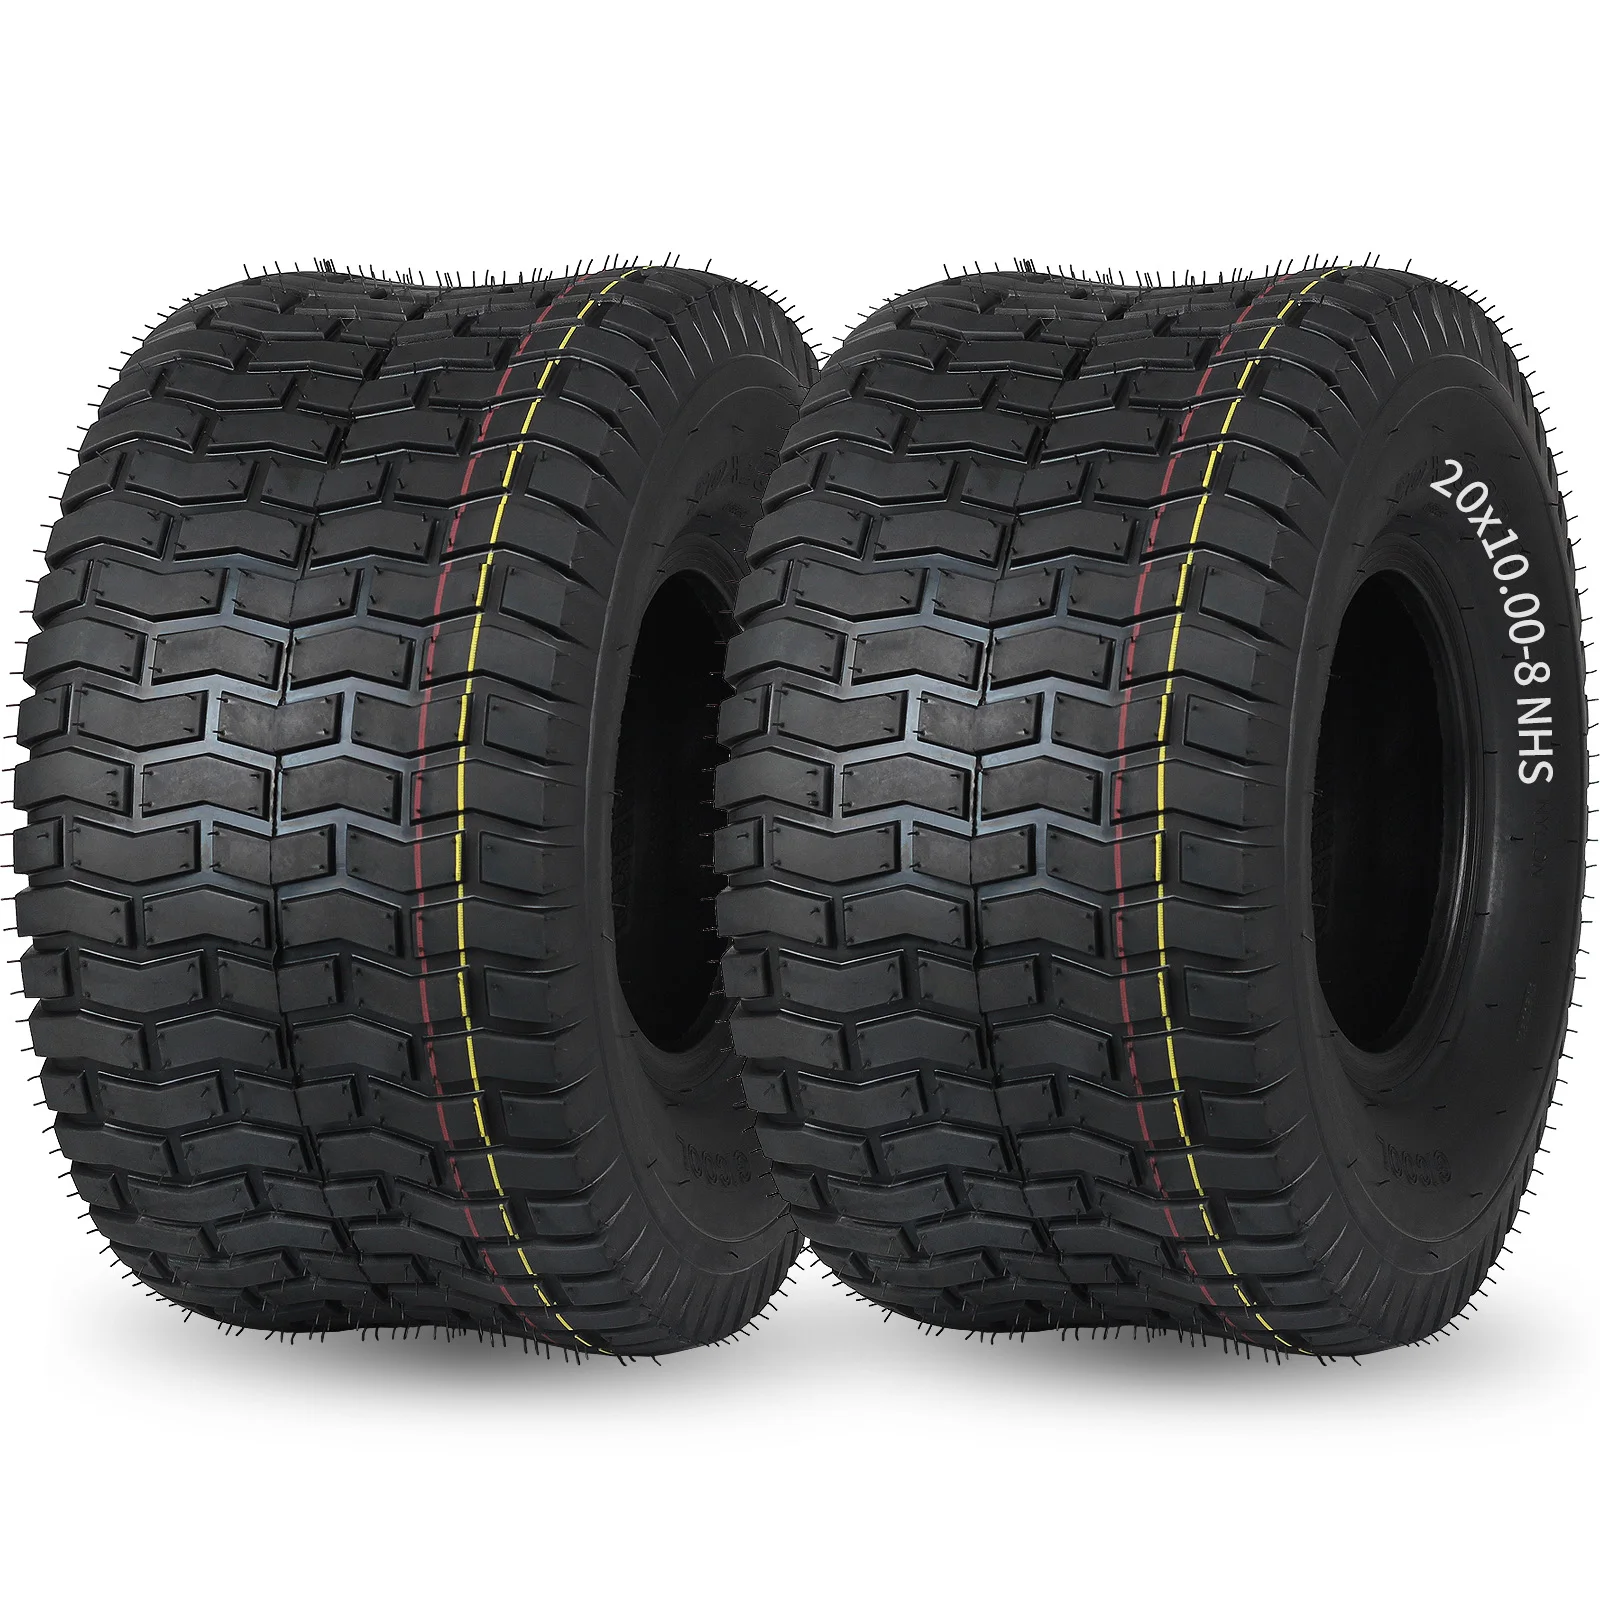 20 x 10.00-8 Turf-V Pattern Lawnmower Tubeless Turf Tire, 20x10-8 for Tractor Riding Lawnmowers, 4 Ply